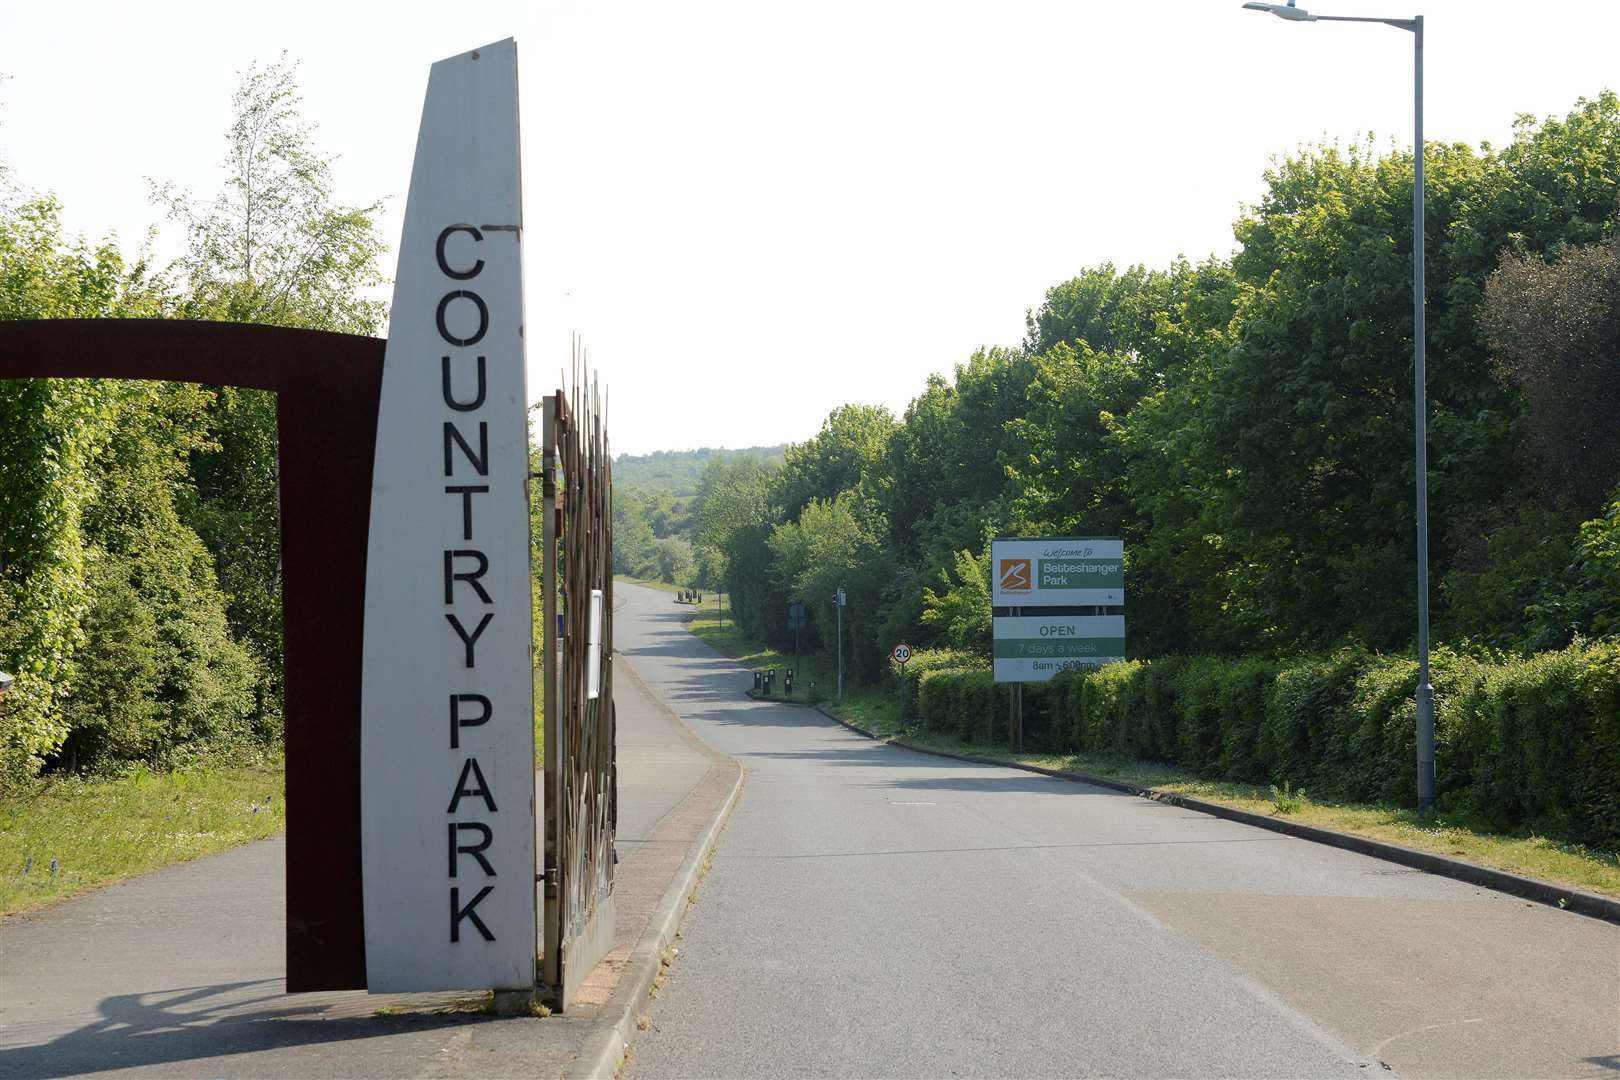 New parking charges have been unveiled at Betteshanger Country Park in Deal